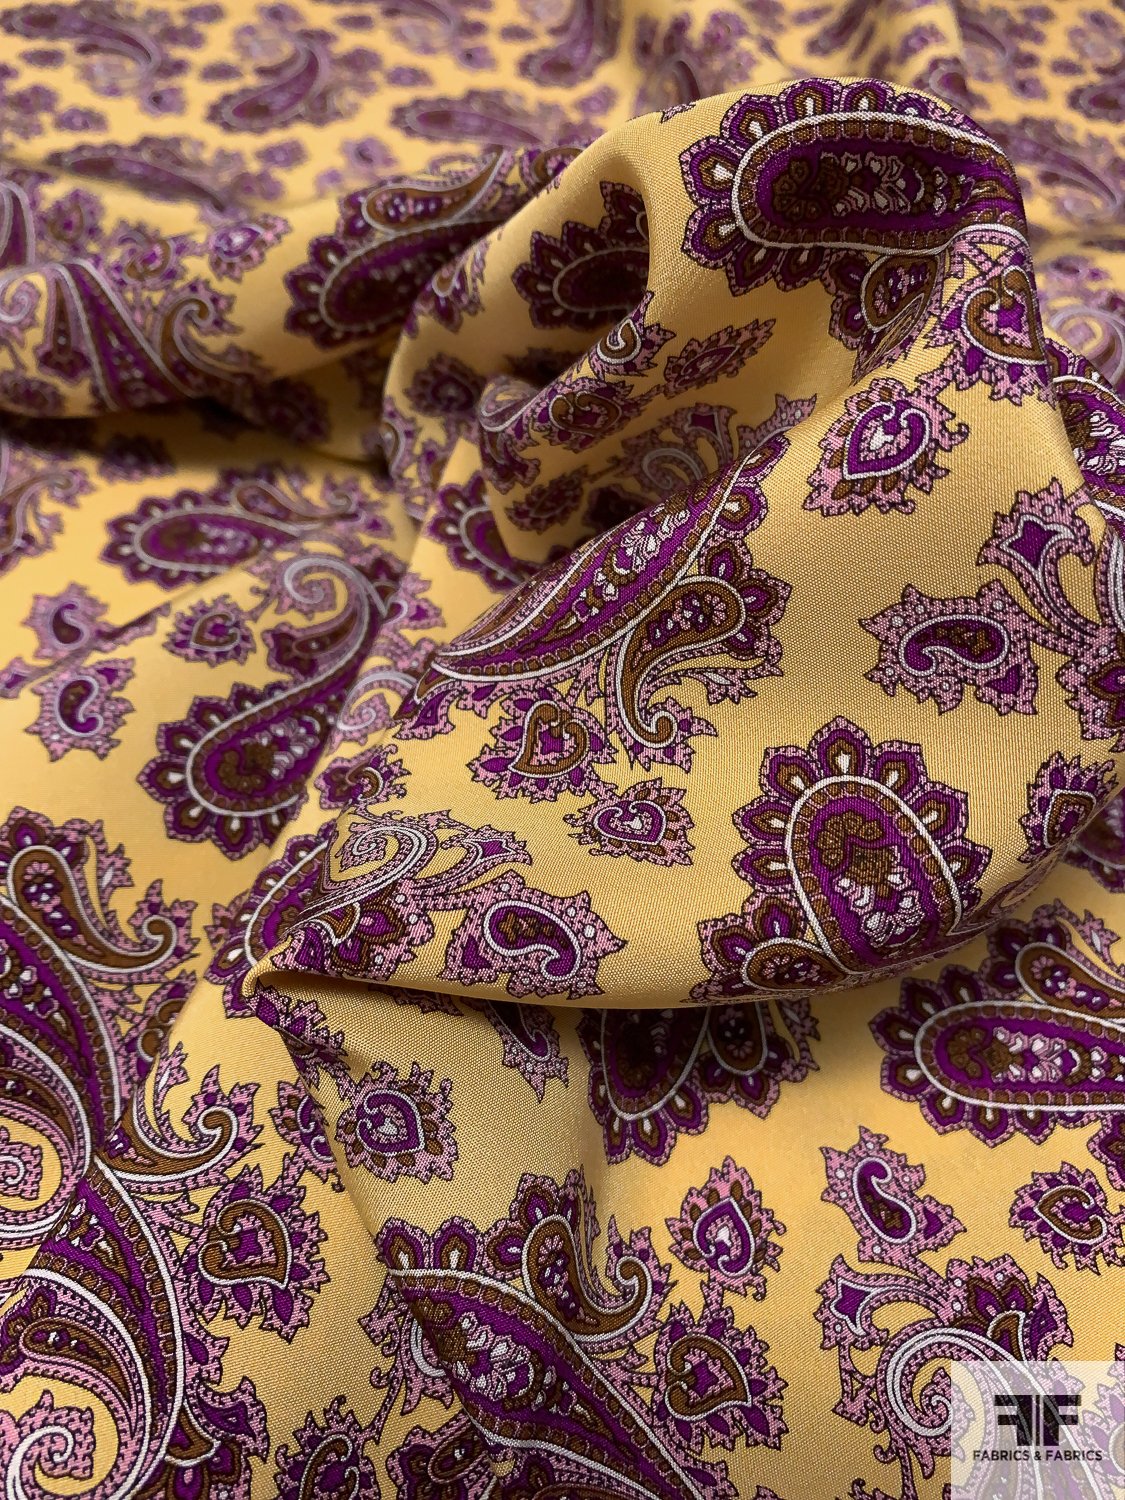 Paisley Printed Silk Crepe de Chine - Buttery Yellow / Purple / Brown / PInk